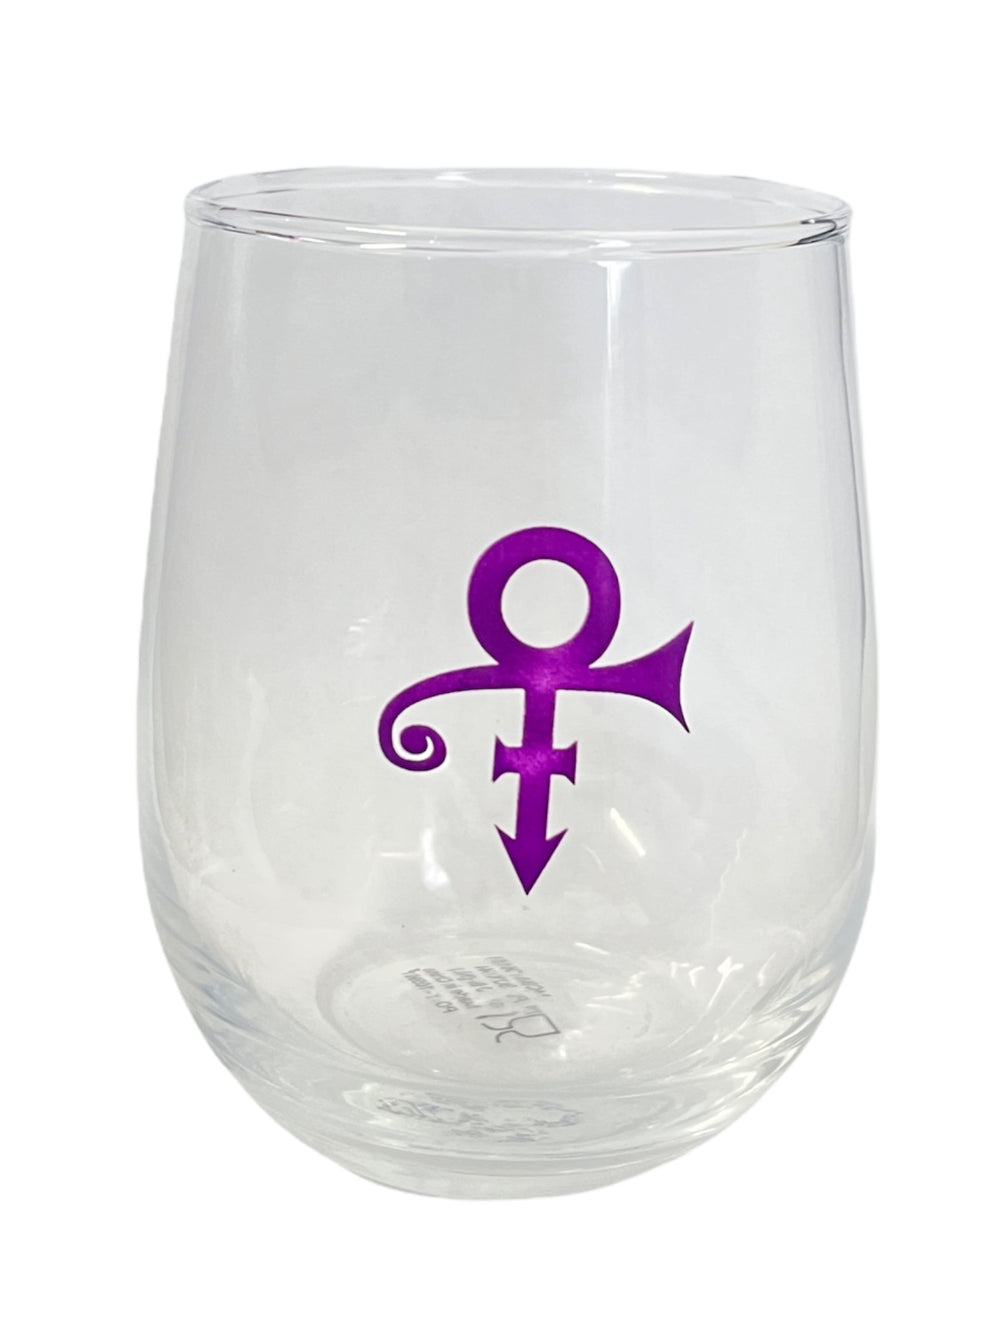 Prince – Love Symbol Stemless Glass Official & Xclusive Estate Authorised Love Symbol Xclusive